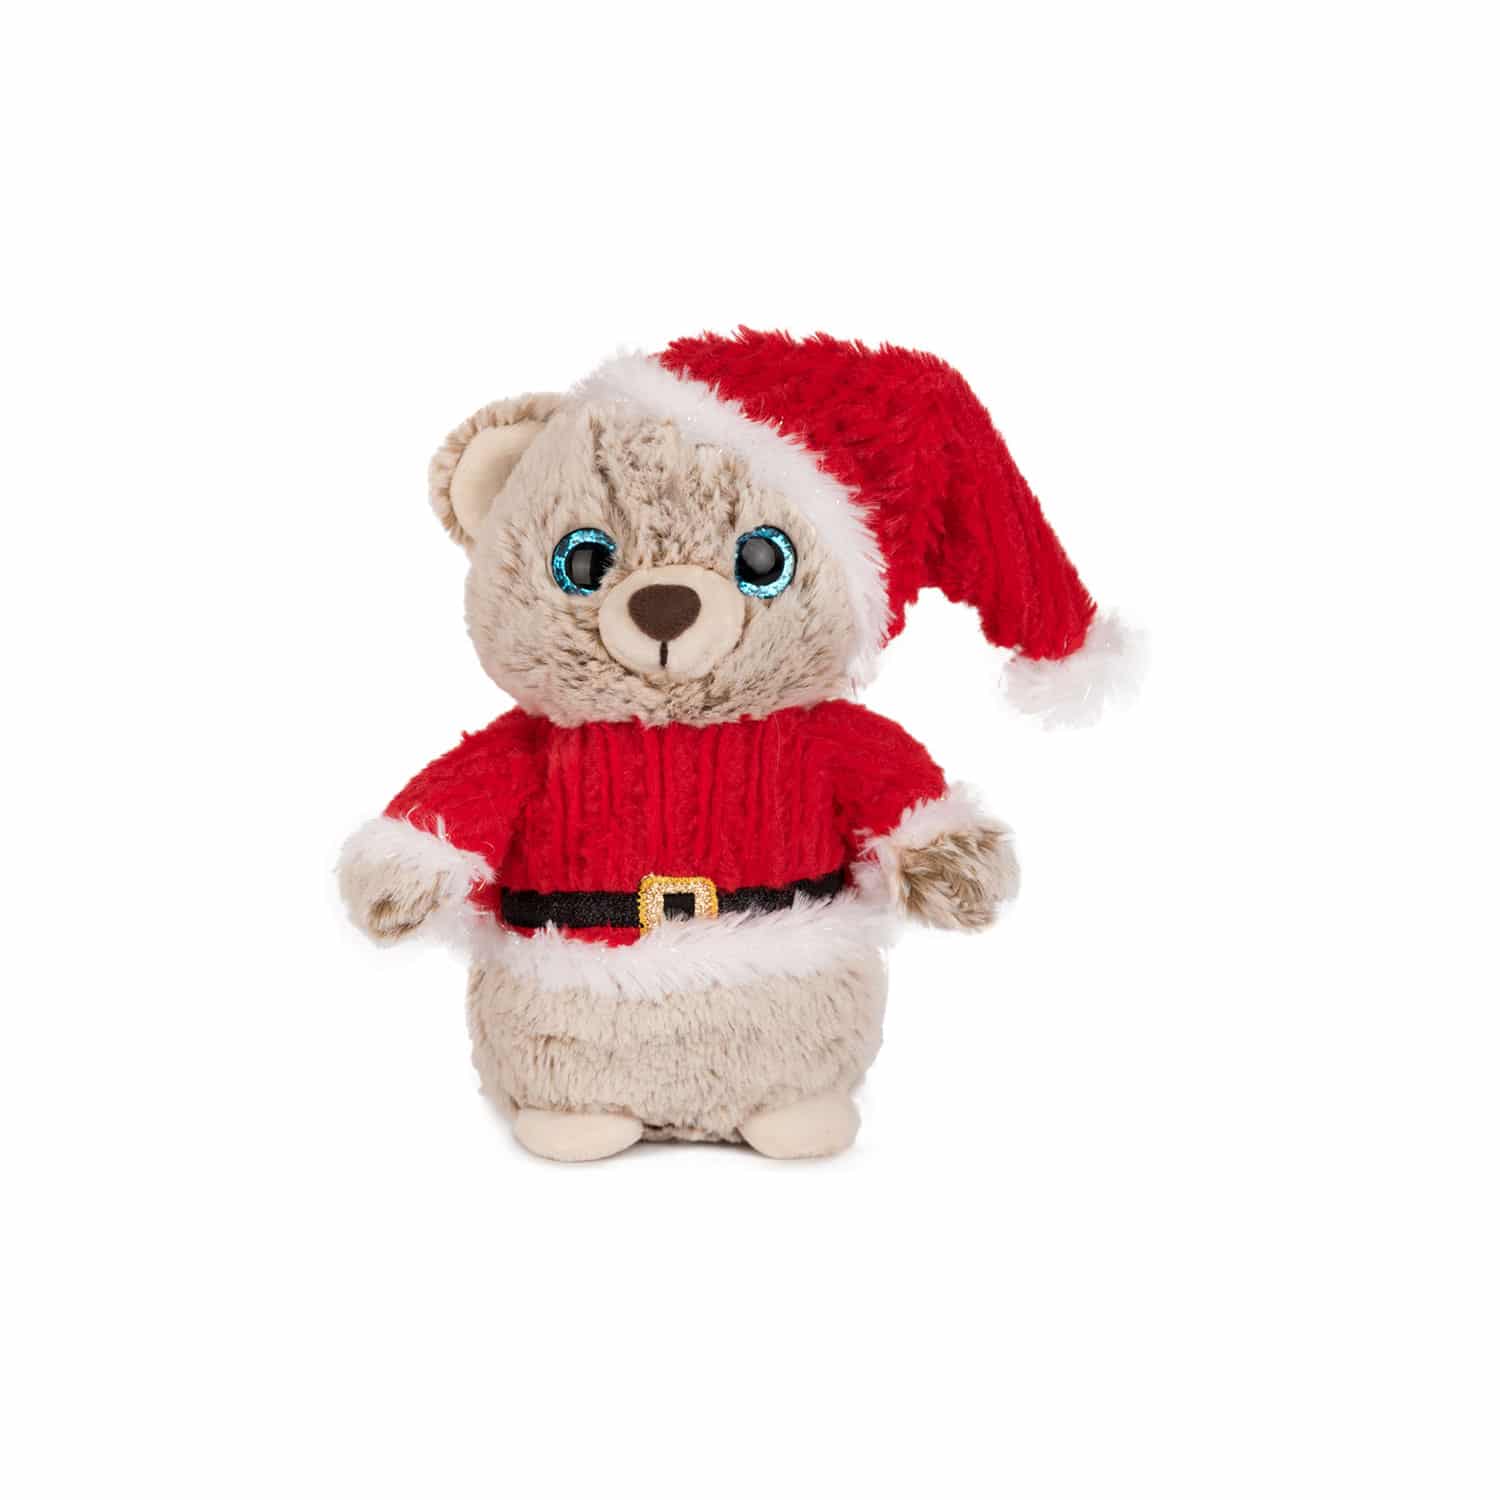 Bear with Christmas clothes